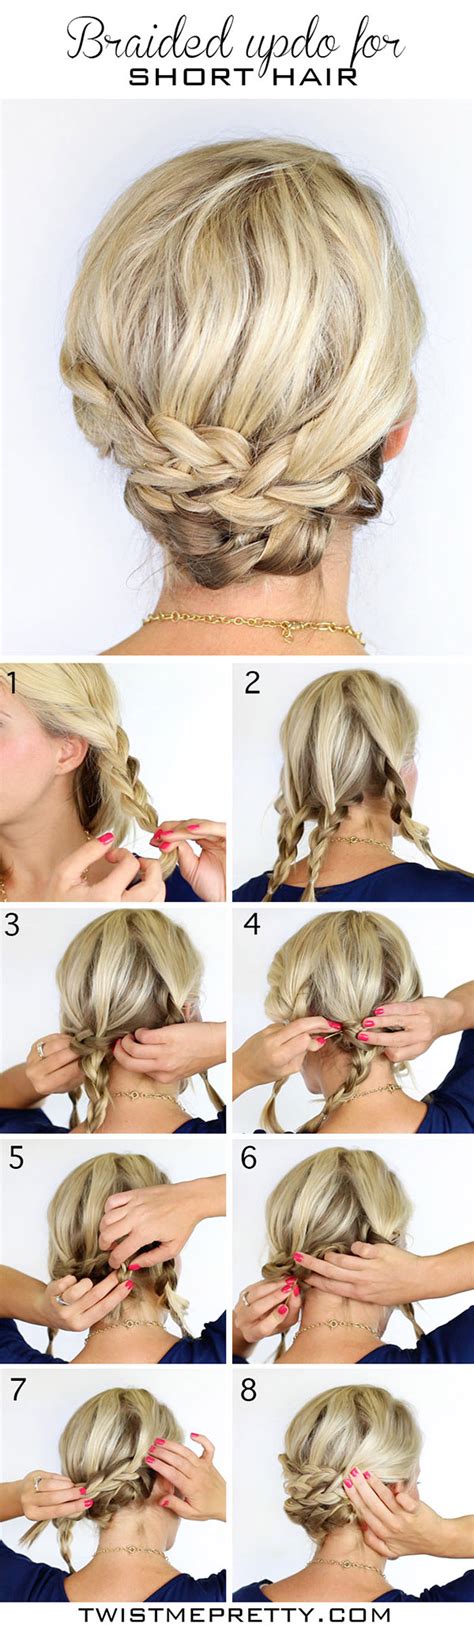 20 Diy Wedding Hairstyles With Tutorials To Try On Your